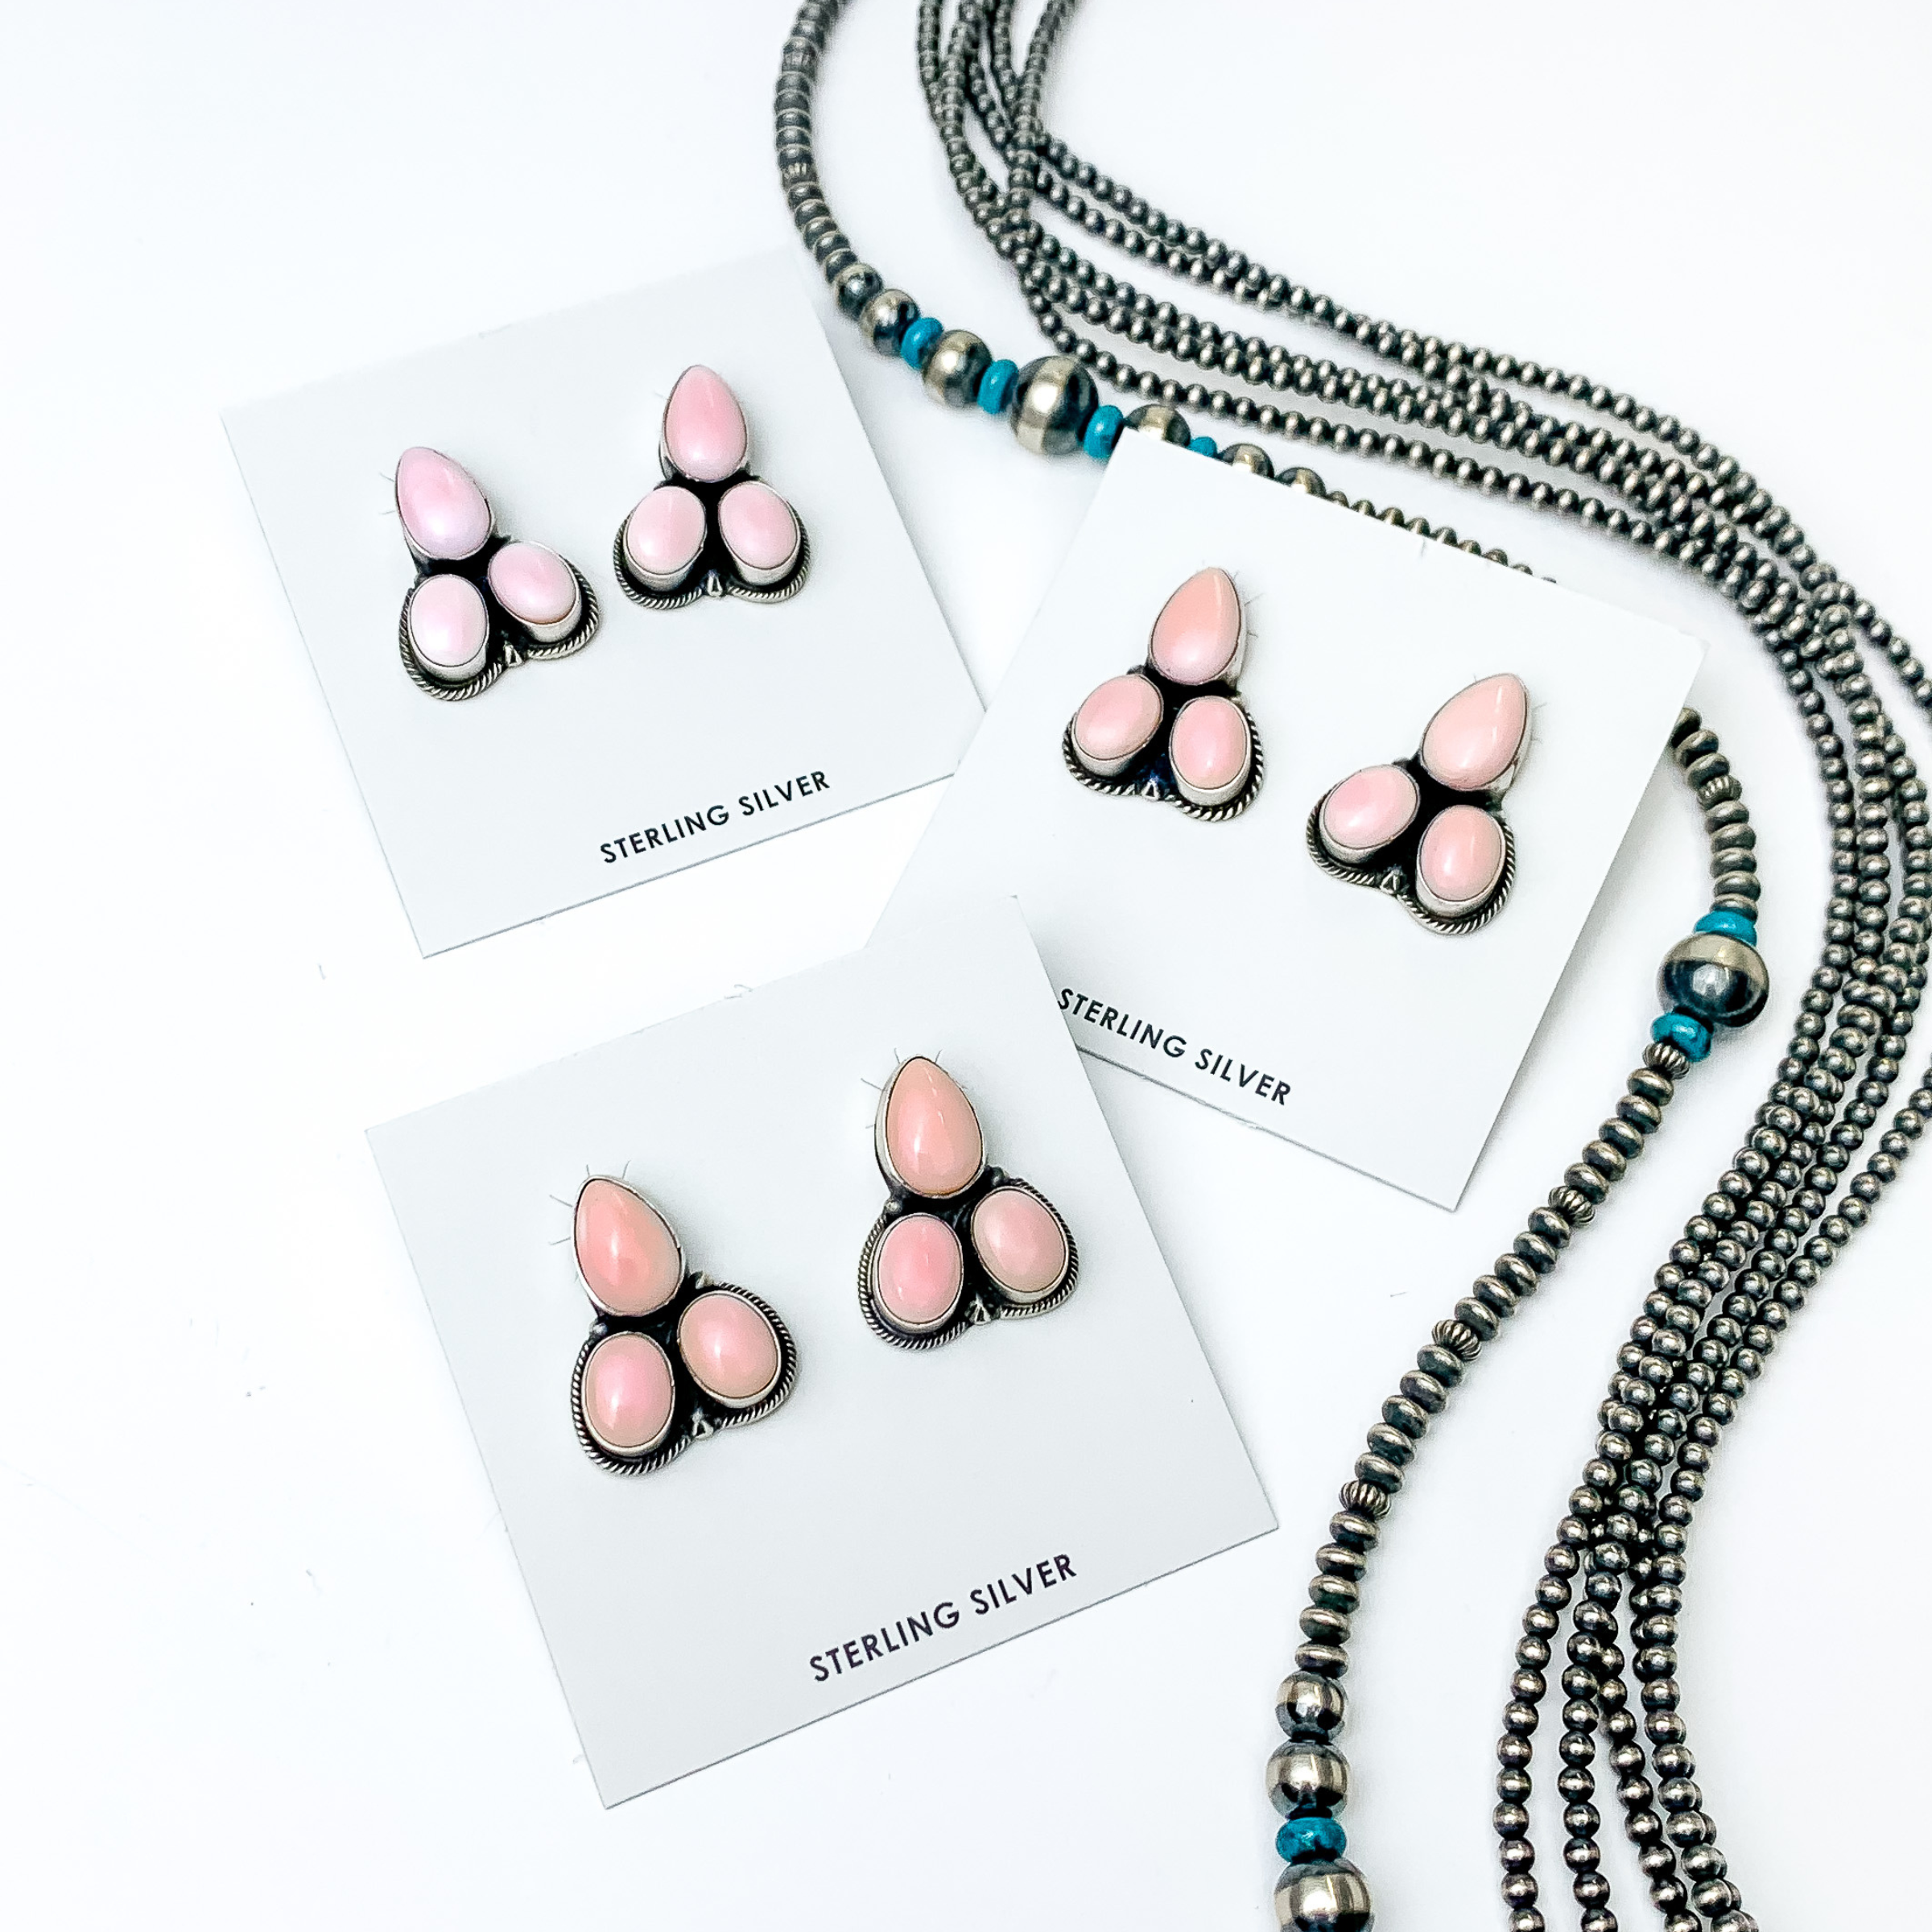 Pictured are three pairs of pink, stone stud earrings with silver outline. The earrings include a teardrop stone and two circle stones beneath the teardrop stone. These earrings are pictured on a white background with silver beads on the right side of the picture. 